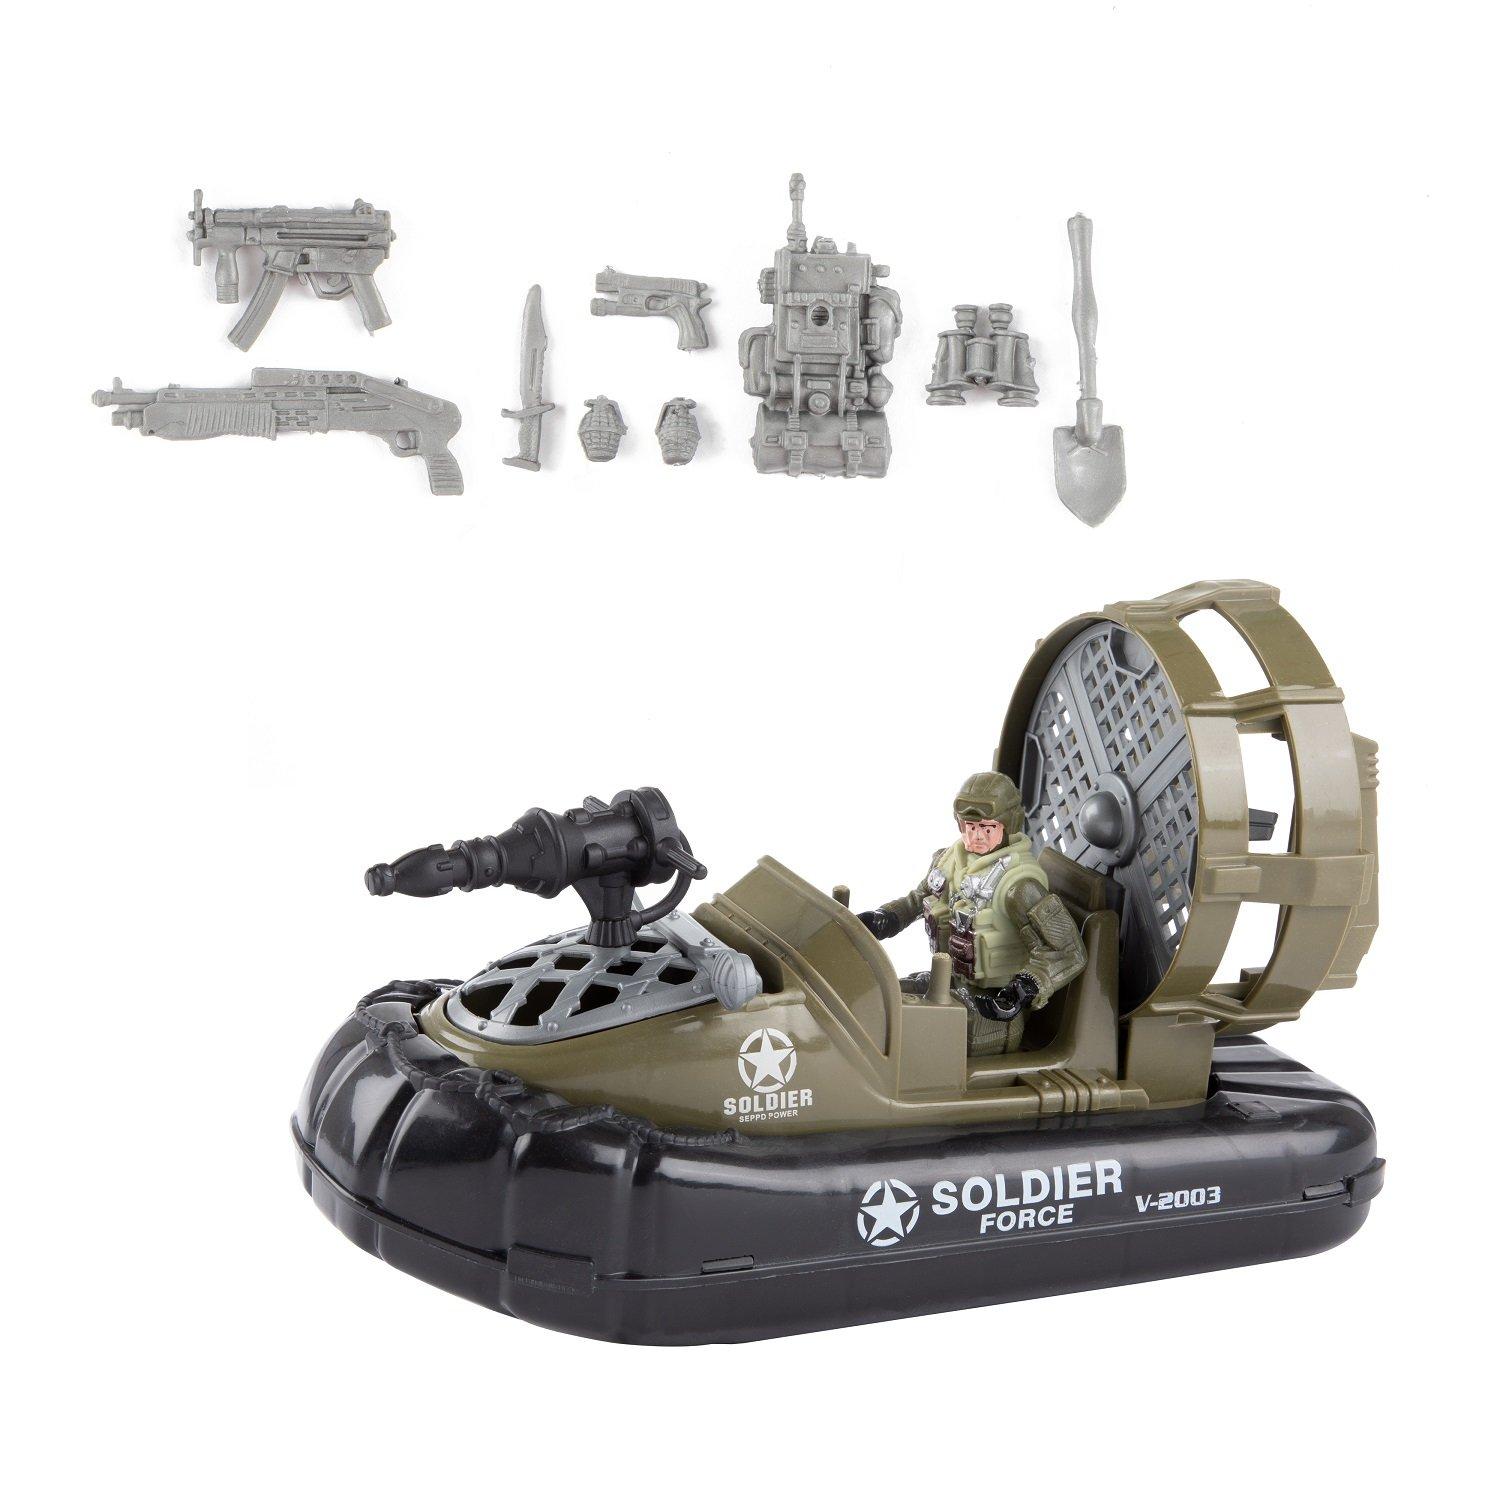 Toy Army Soldier with Hovercraft Board Military Soldier Playset